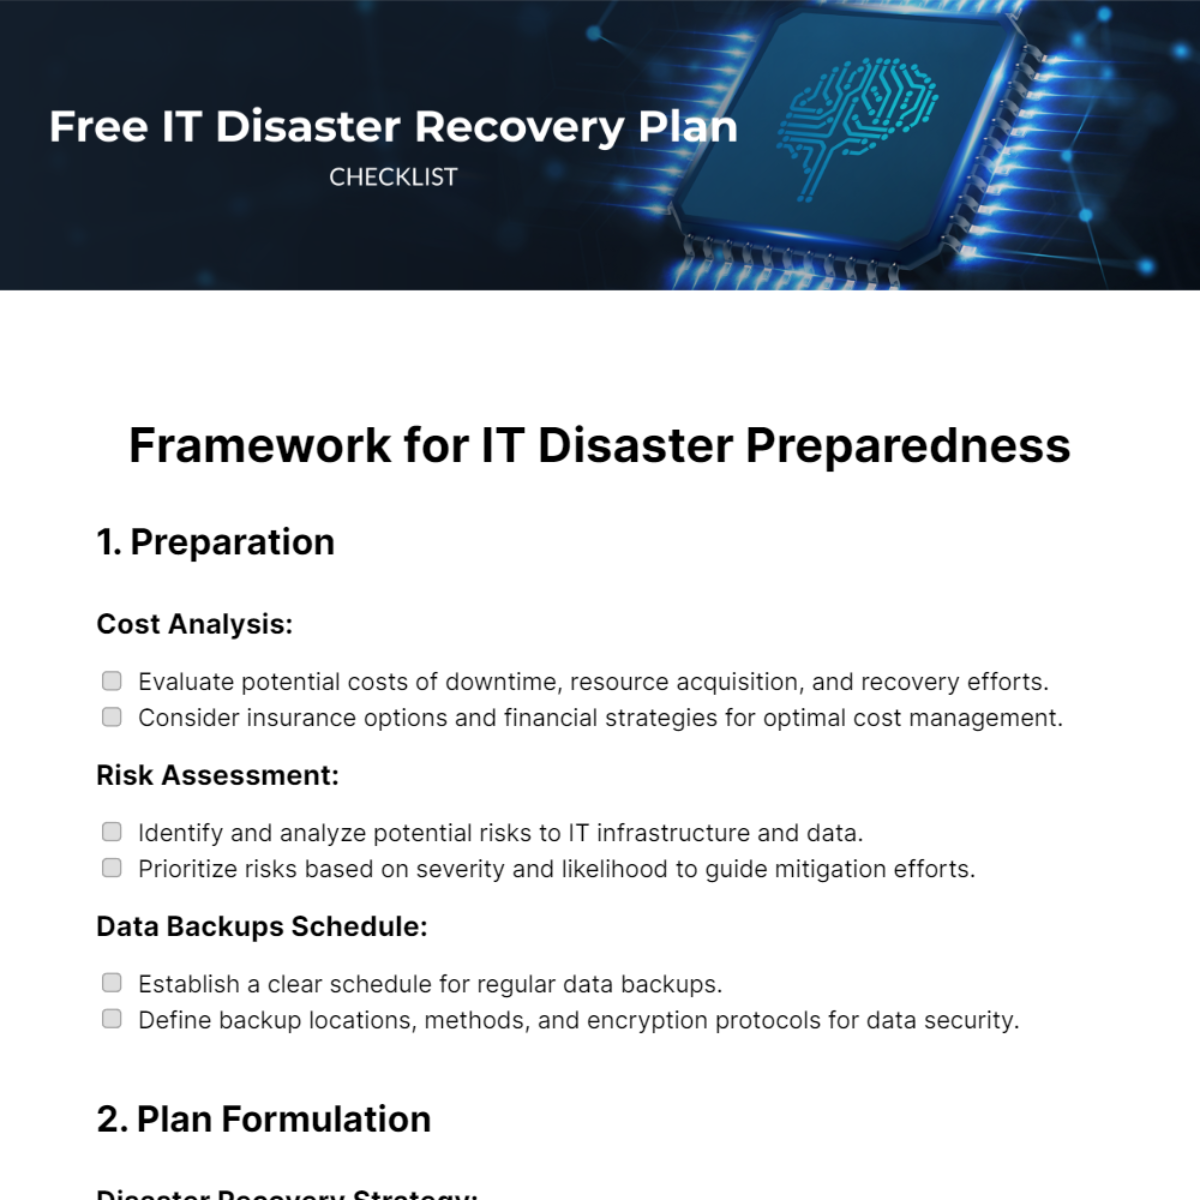 Free IT Disaster Recovery Plan Checklist Template